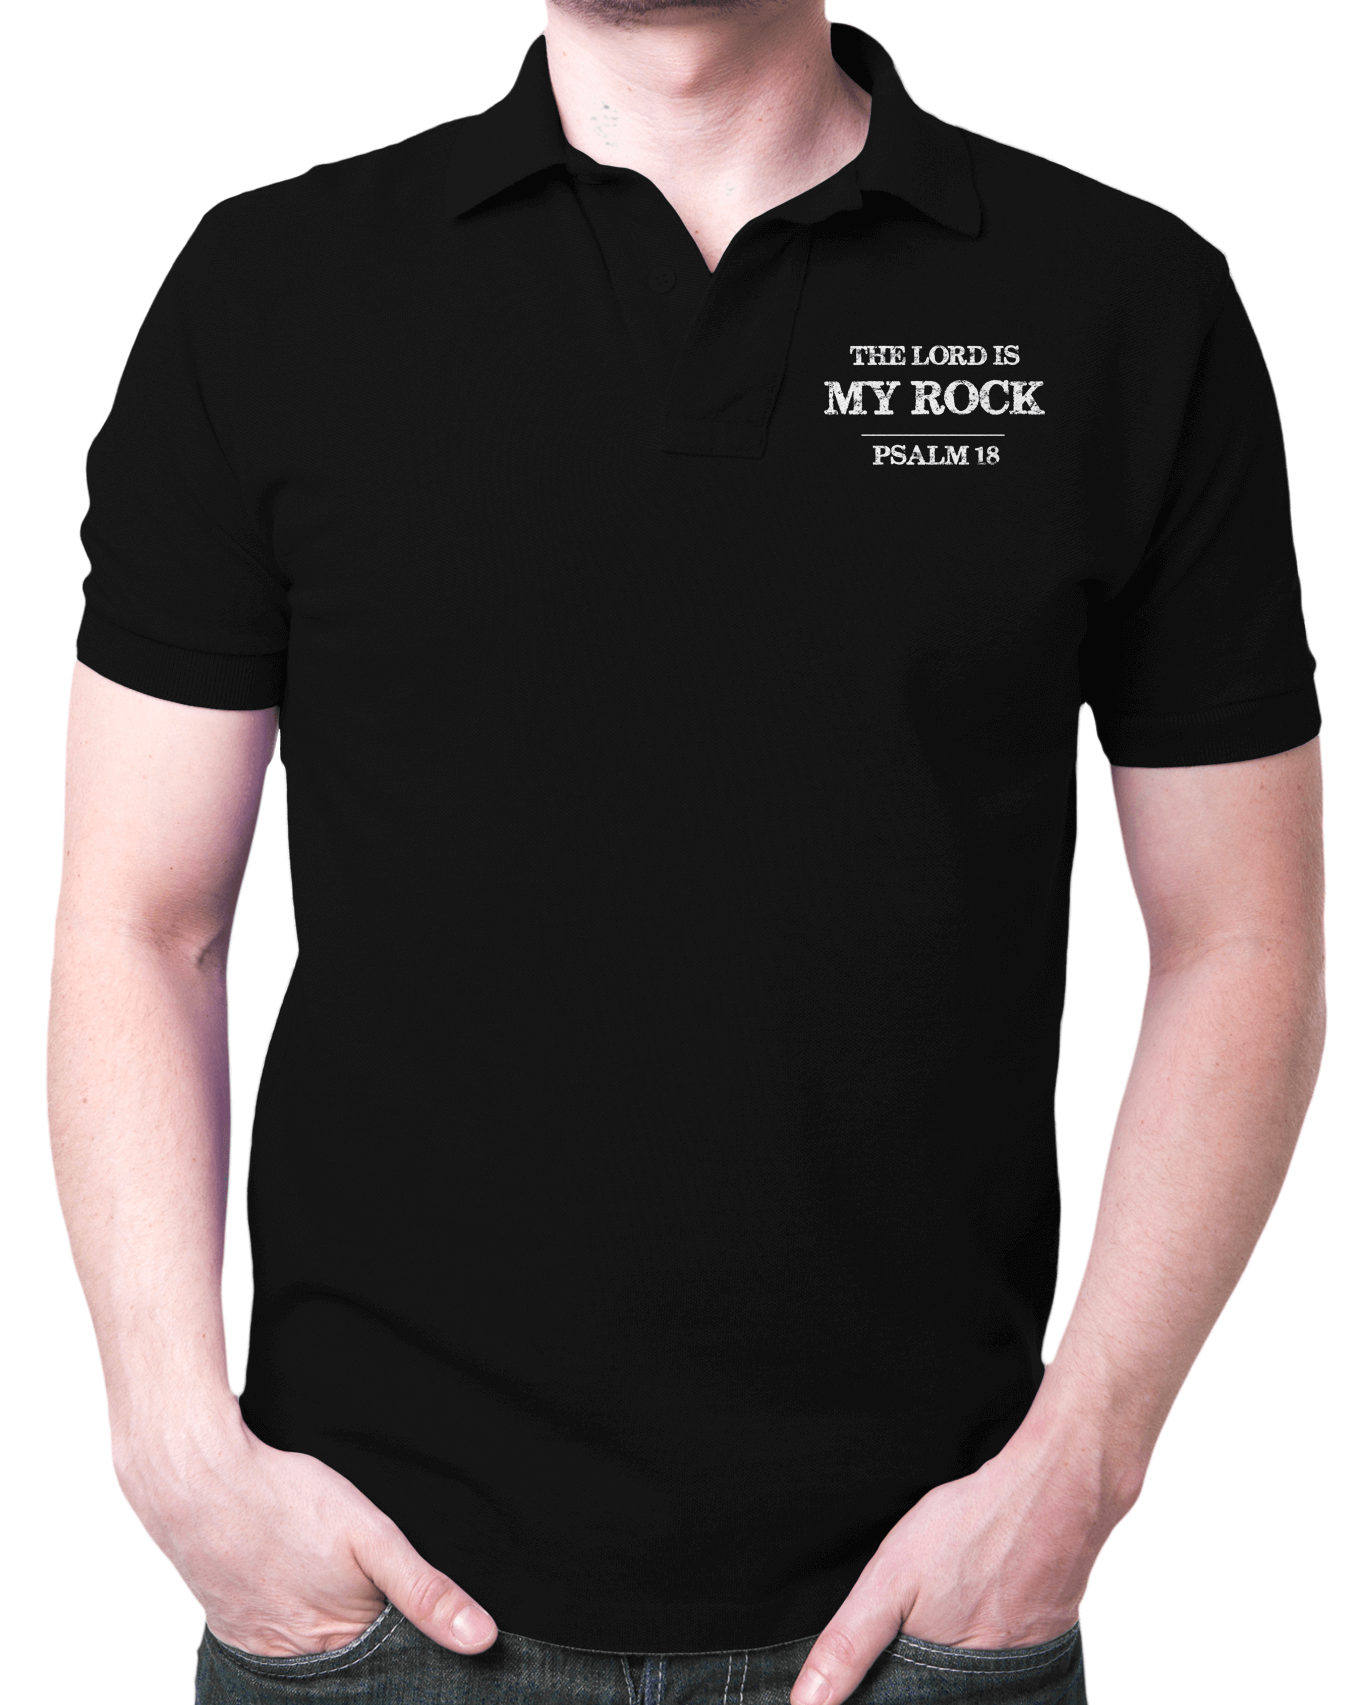 Living Words Men Polo T Shirt S / Black The Lord is my Rock- Polo T Shirt